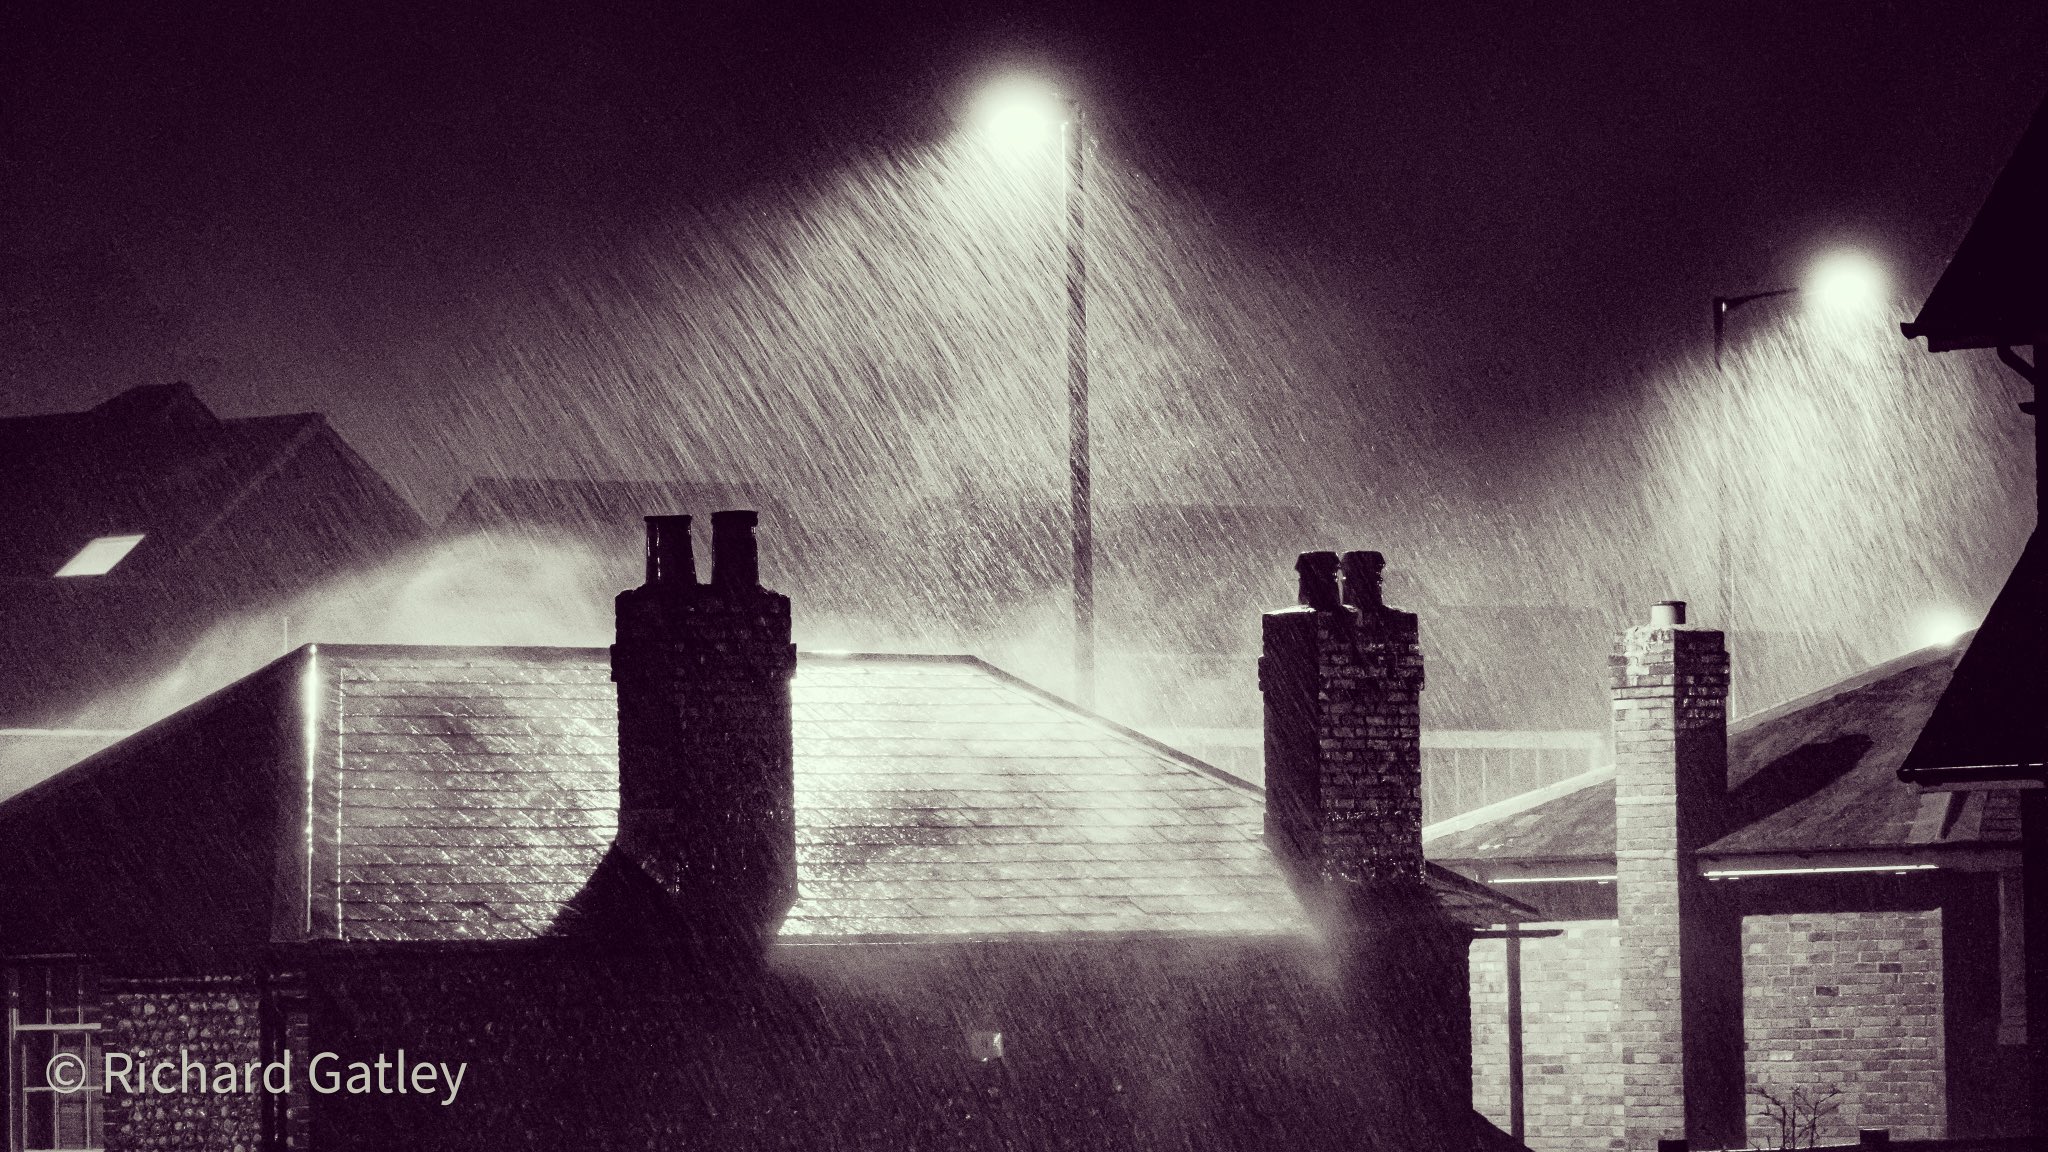 1st Place Torrential rain falling on the old Customs House by the Chichester Canal Basin by Richard Gatley @RGatley